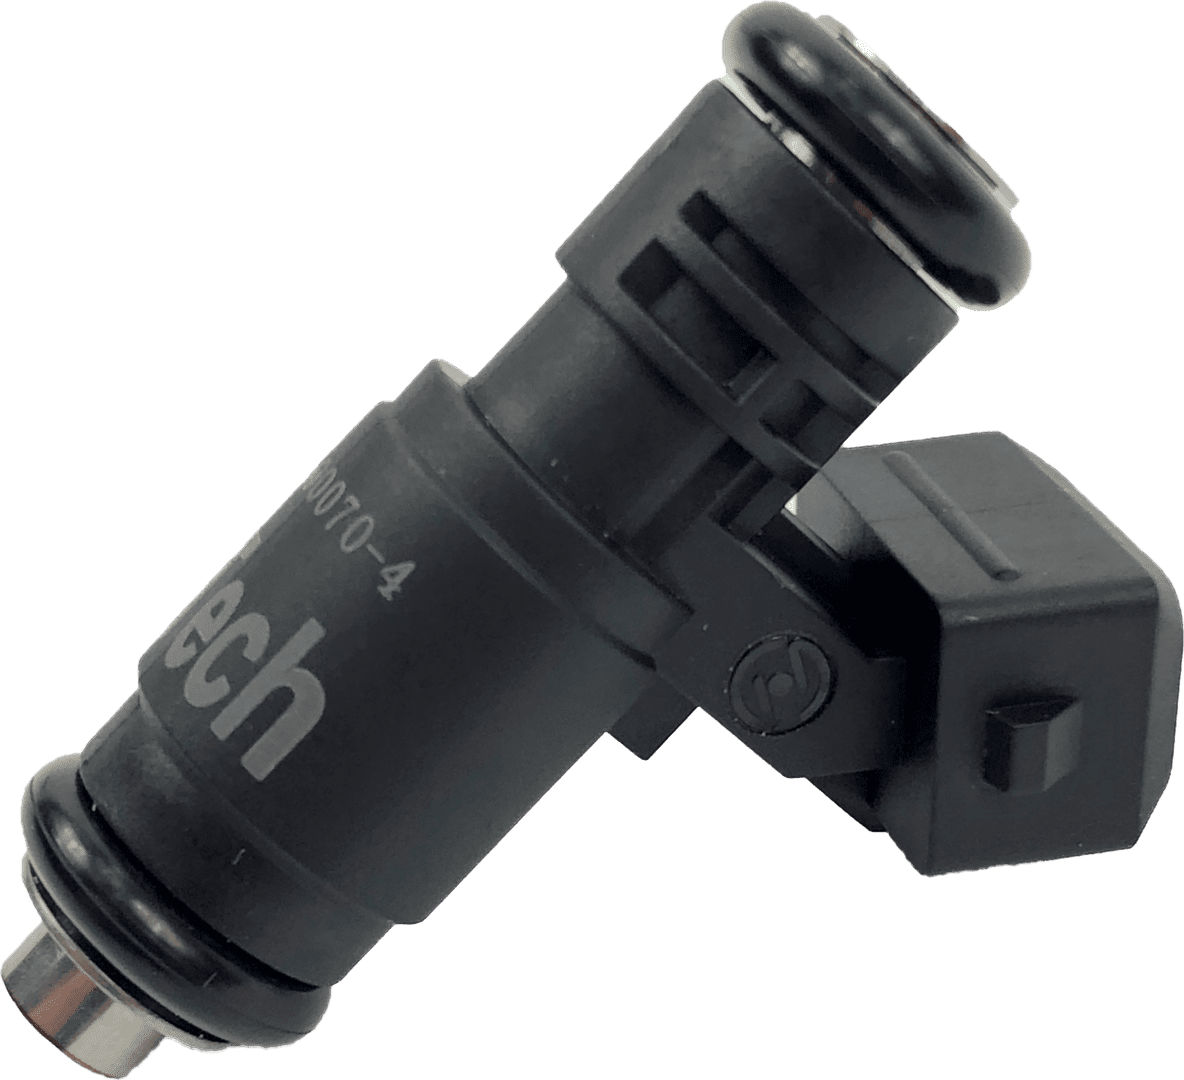 FiTech 10055 Go Fuel Series Replacement Electronic Fuel Injector (55-lb, individual)